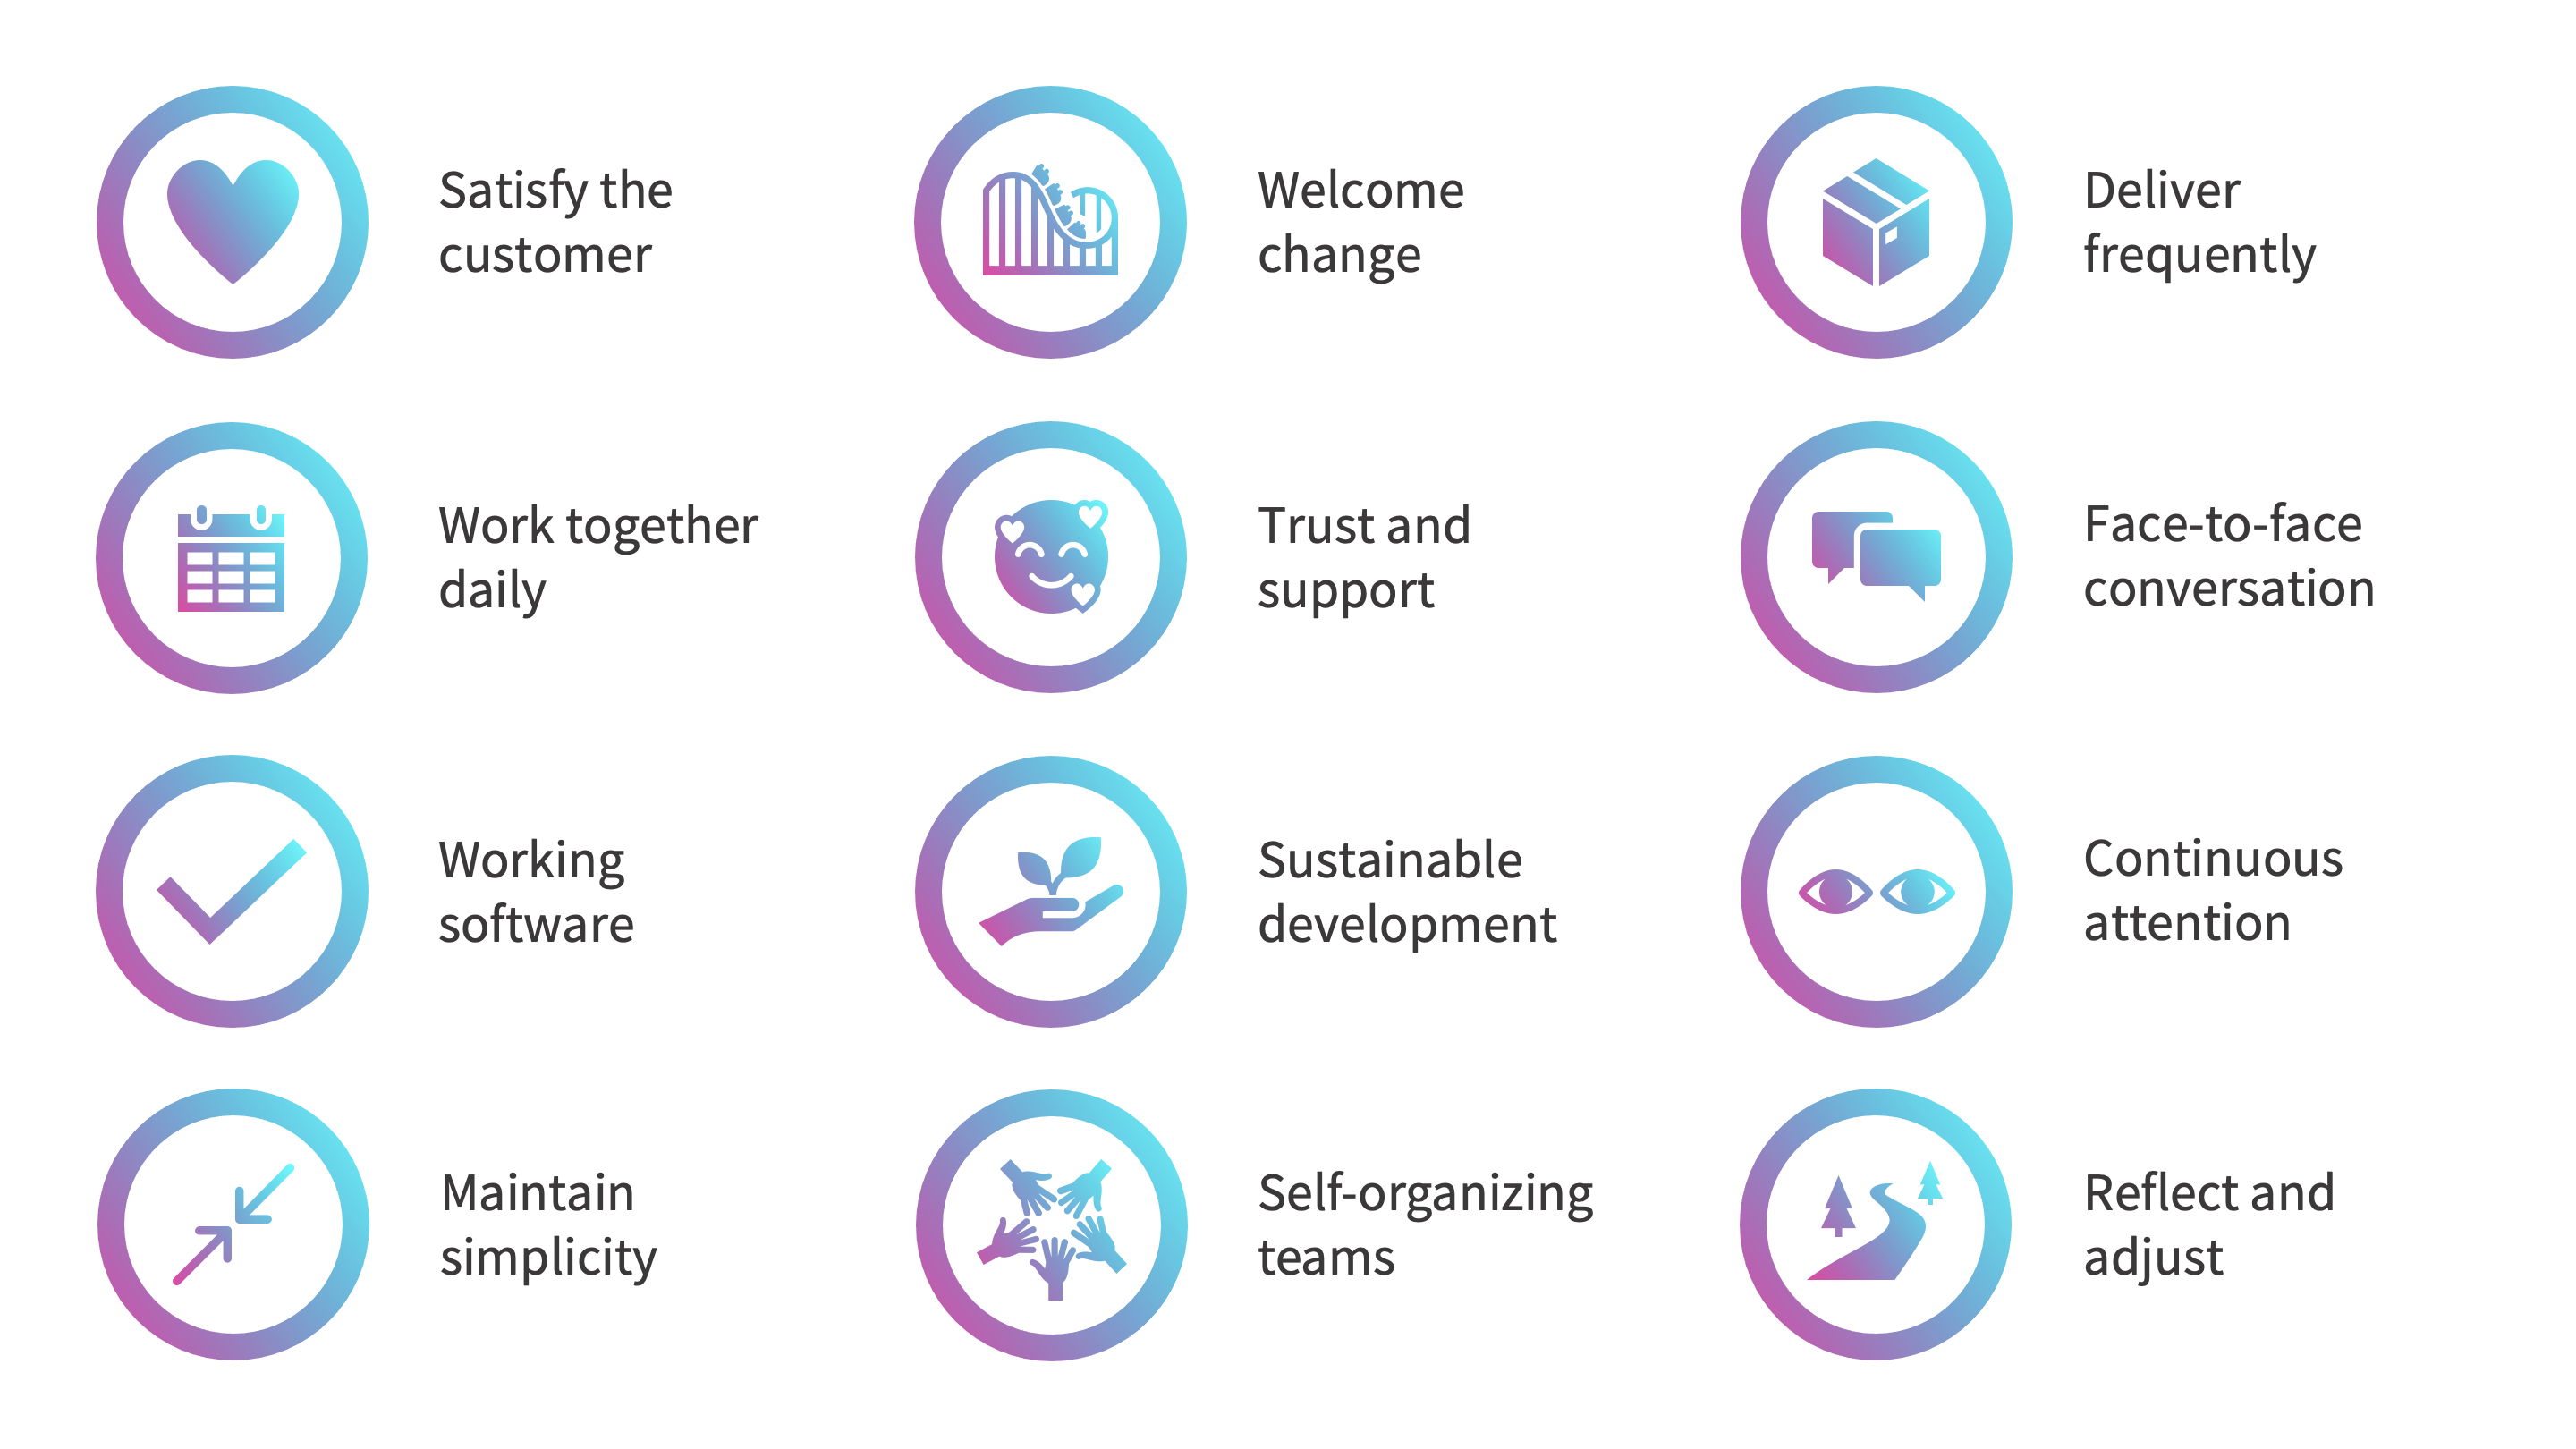 Screenshot from a PowerPoint presentation, showing the 12 Agile principles expressed using icons.